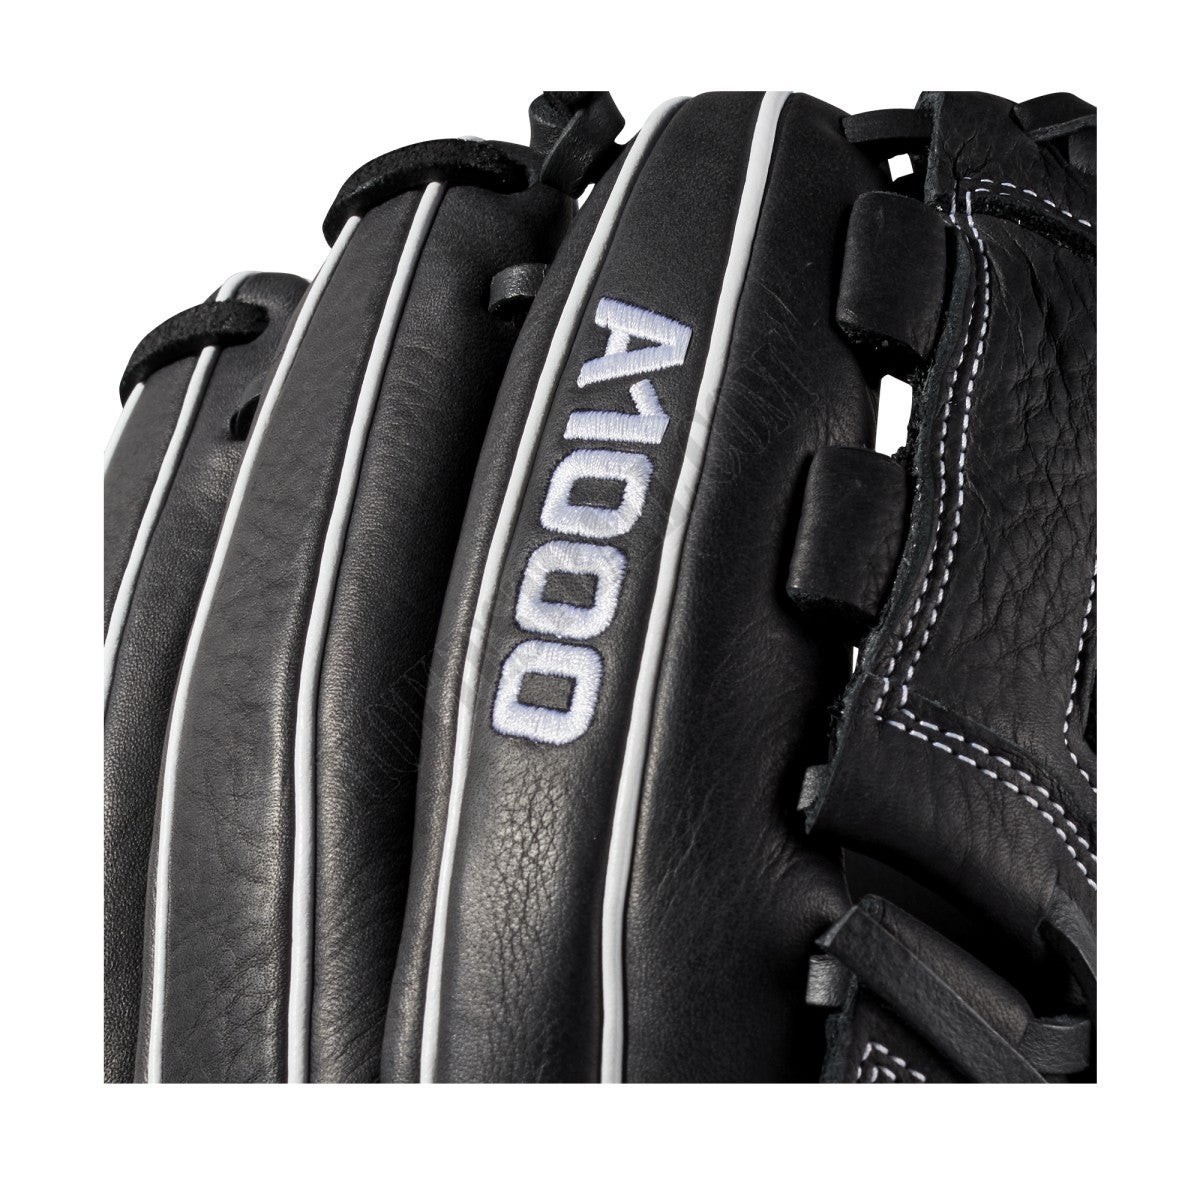 2019 A1000 12" Pitcher's Fastpitch Glove ● Wilson Promotions - -6